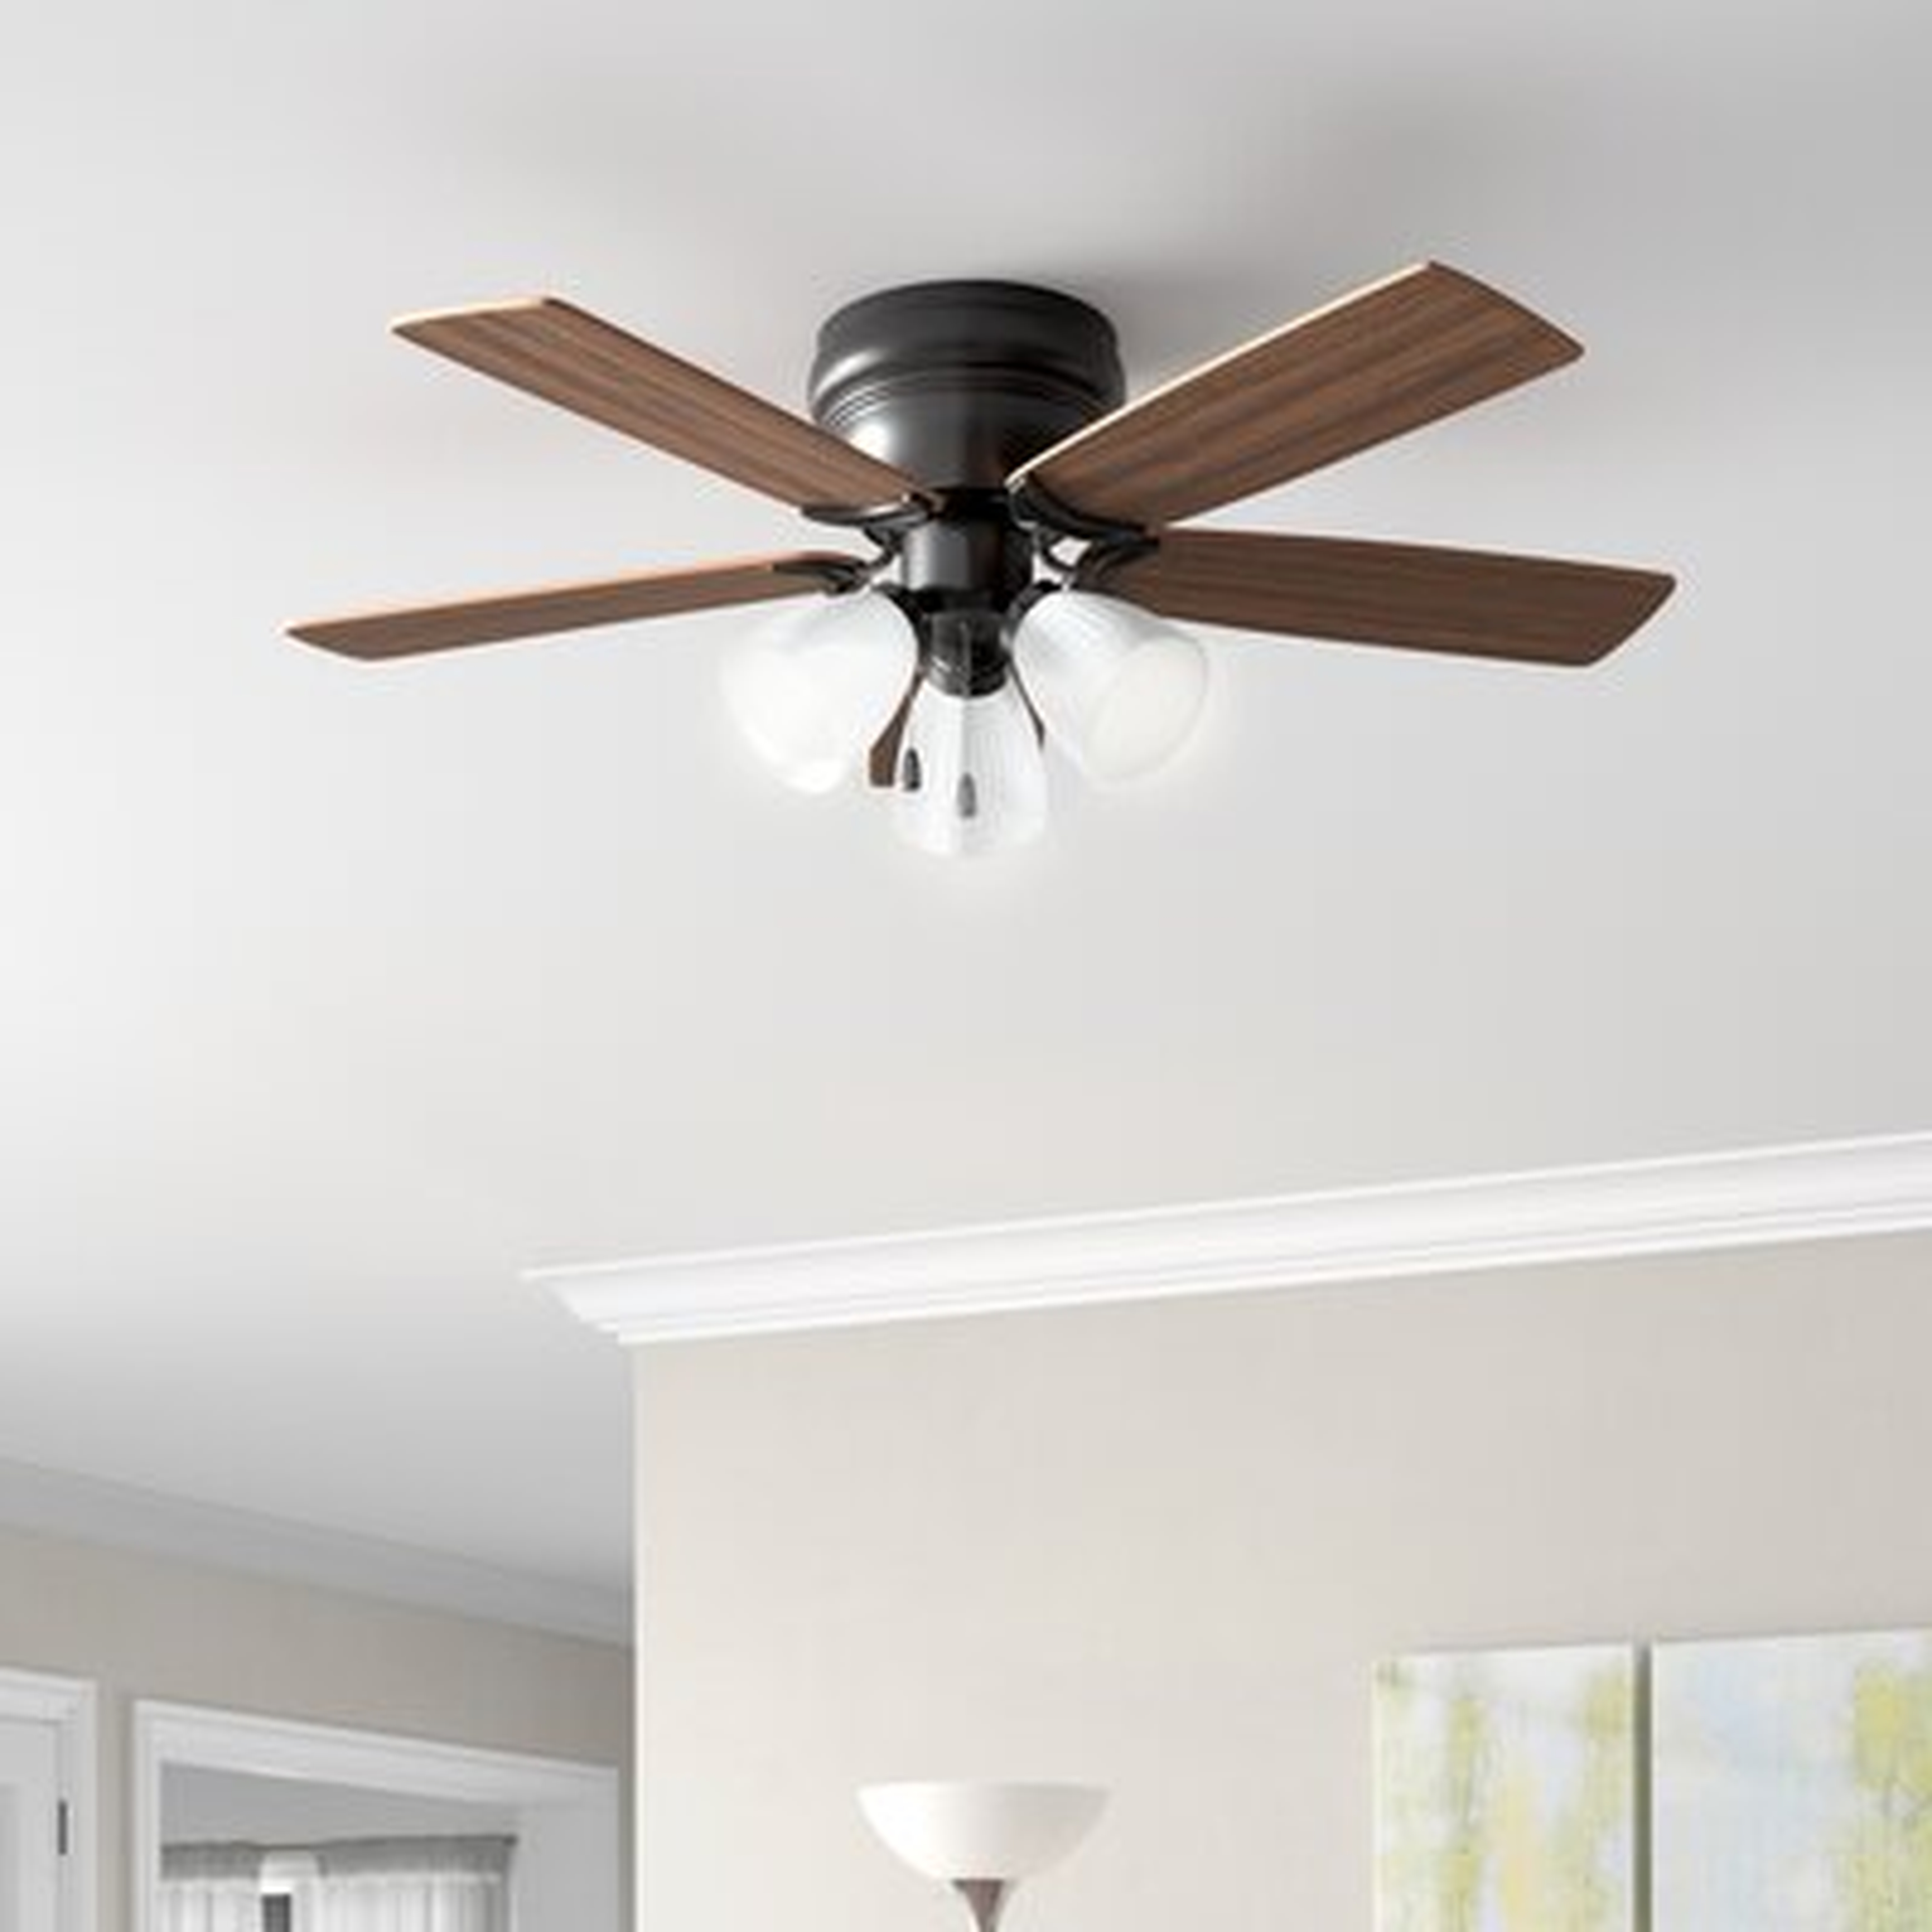 42" 5 - Blade LED Standard Ceiling Fan with Pull Chain and Light Kit Included - Wayfair